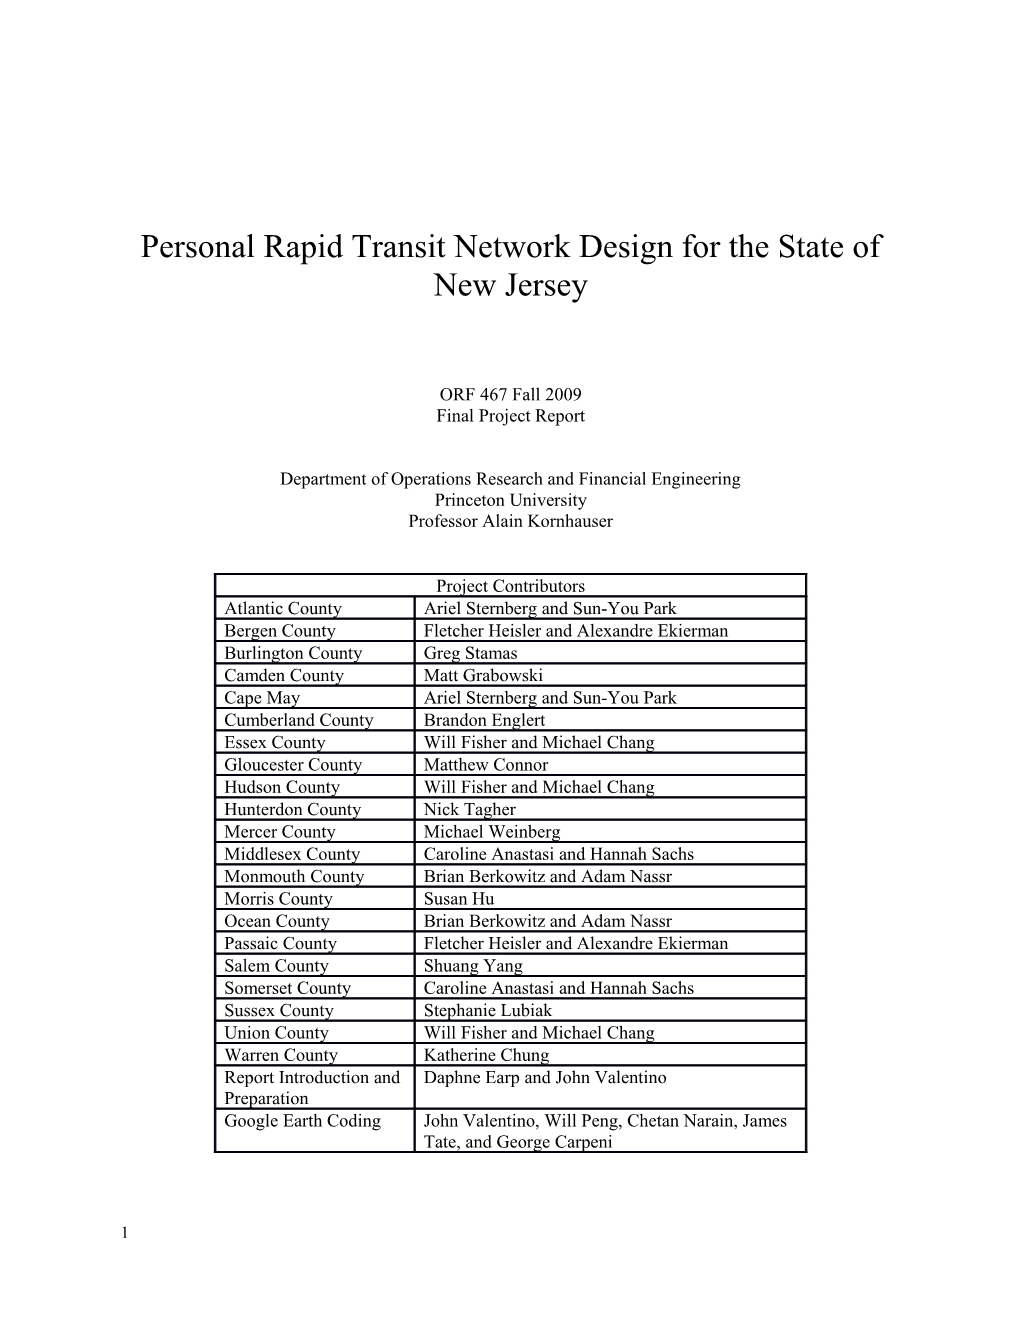 Personal Rapid Transit Network Design for the State of New Jersey